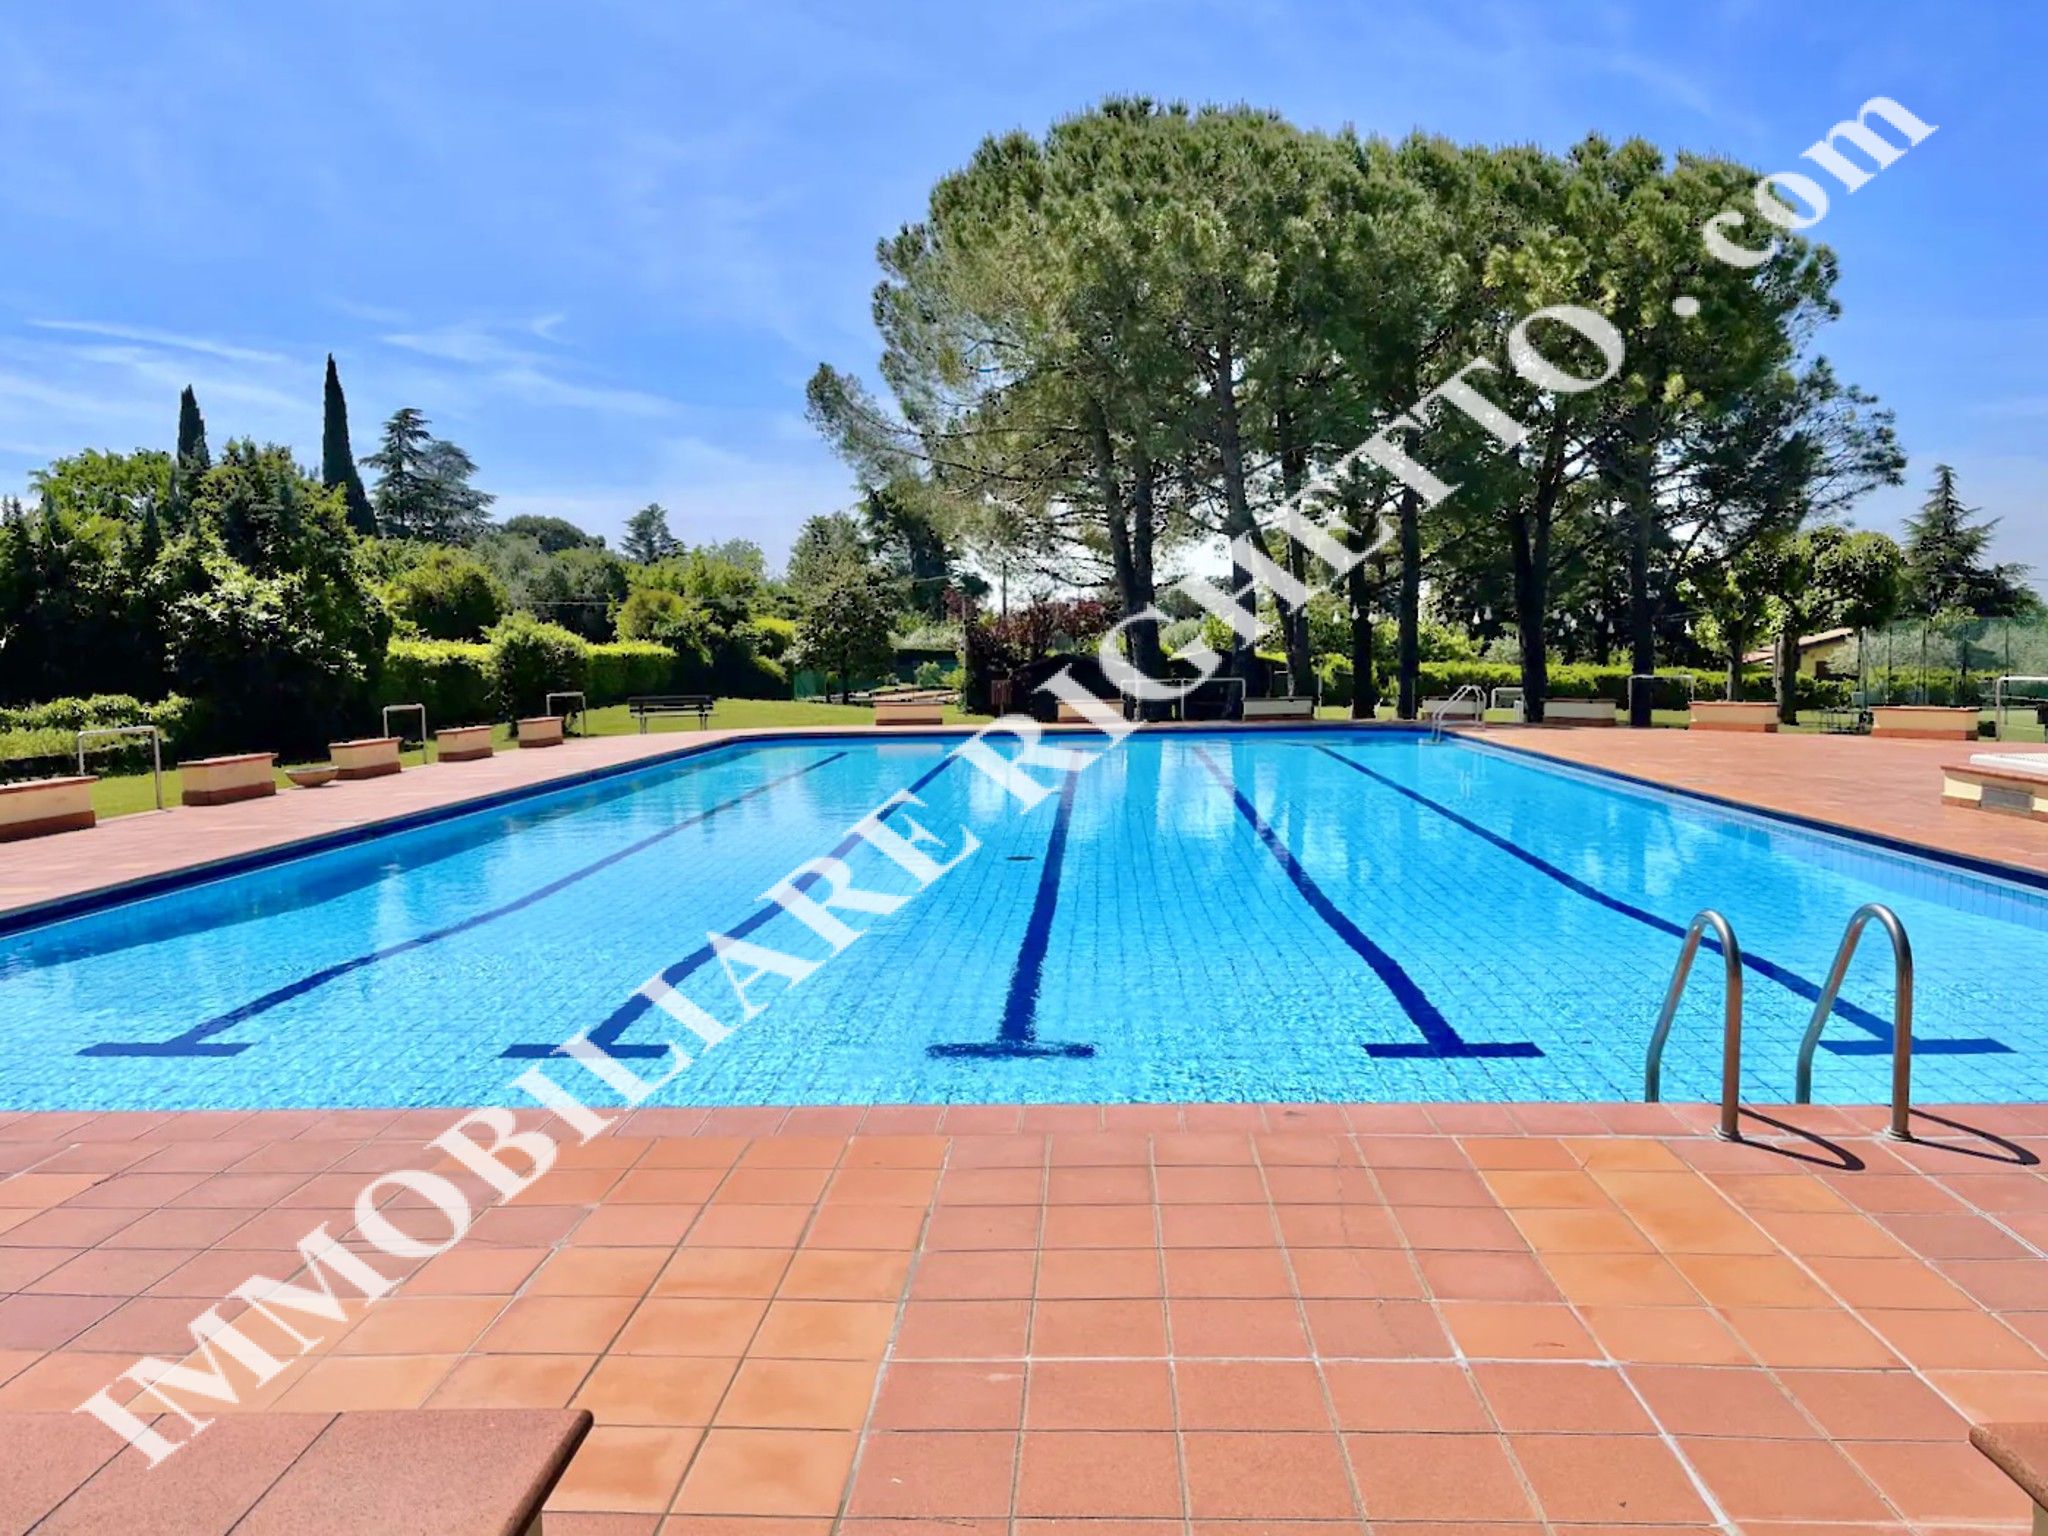 offer property for sale Attractive detached house in a beautiful village with swimming pools.